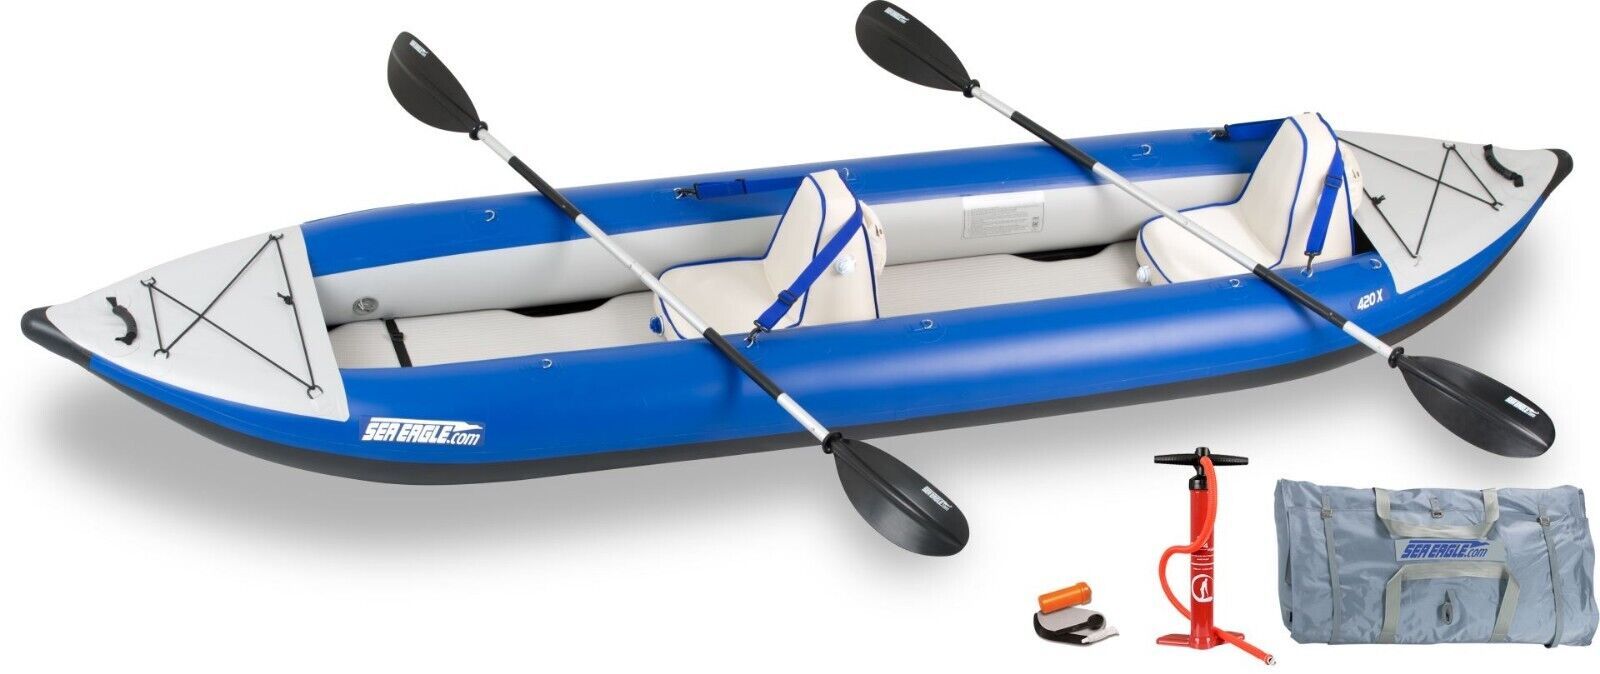 Sea Eagle 420x Deluxe Explorer Package Inflatable Kayak Class 4 Whitewater Rapid - $1,099.00